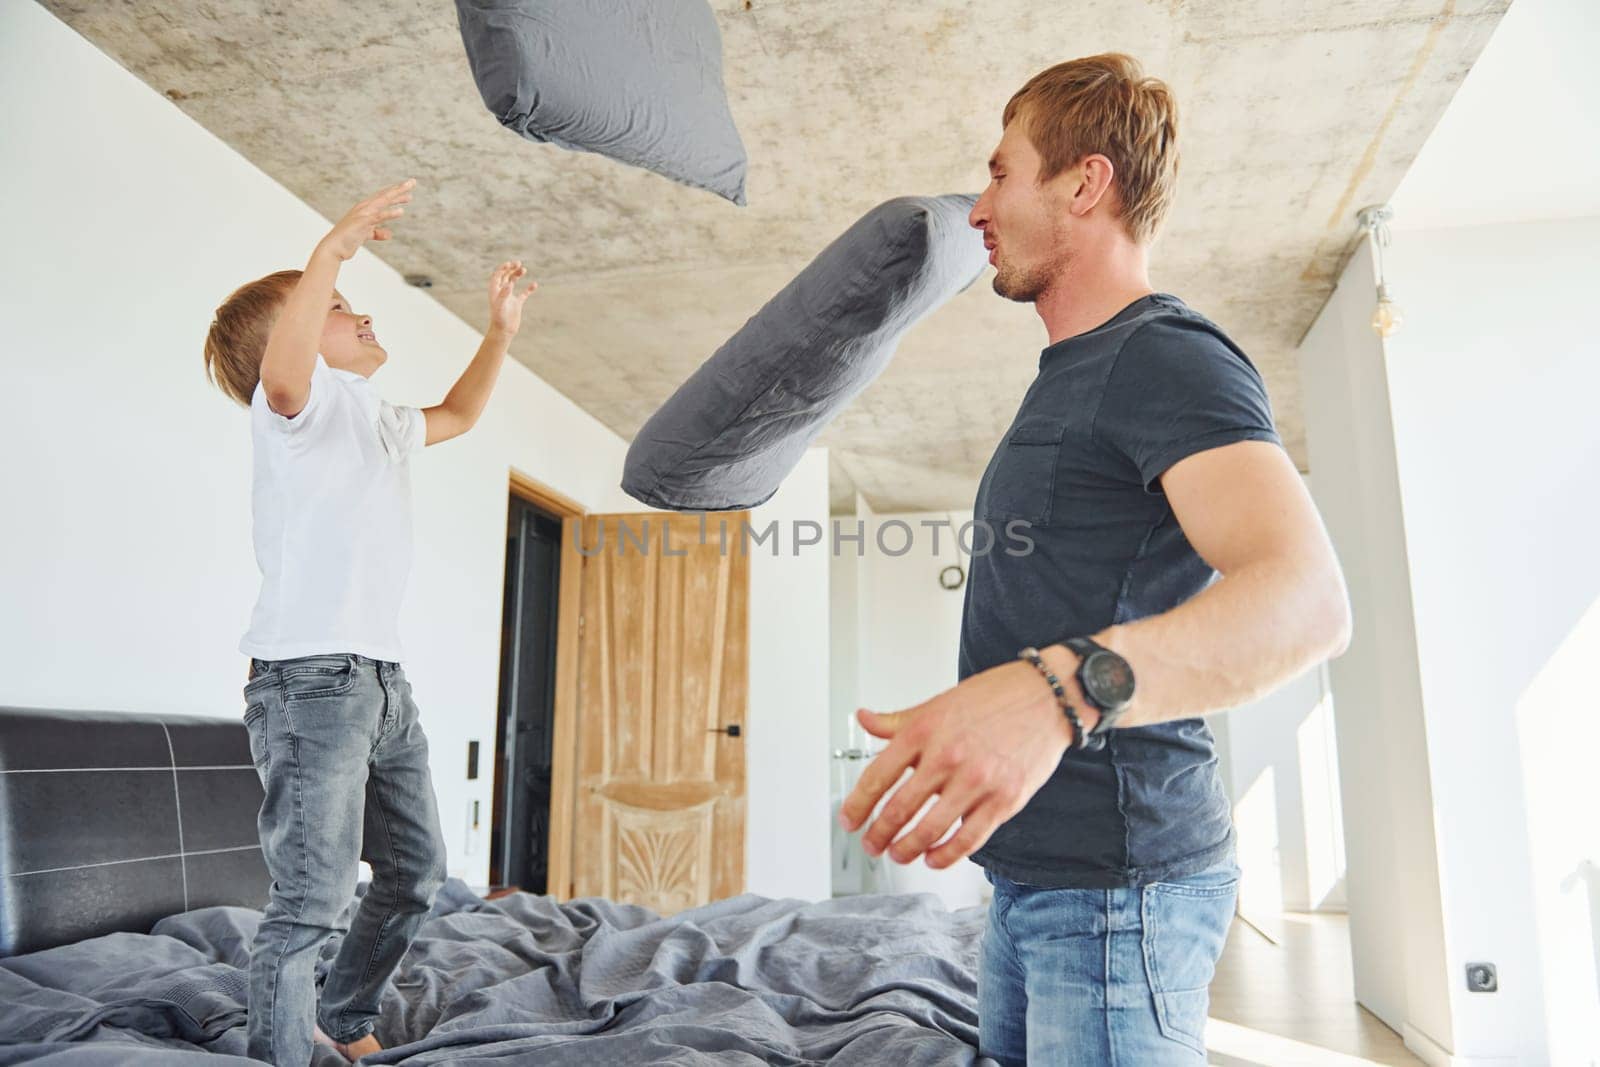 Pillow fight. Father and son is indoors at home together.